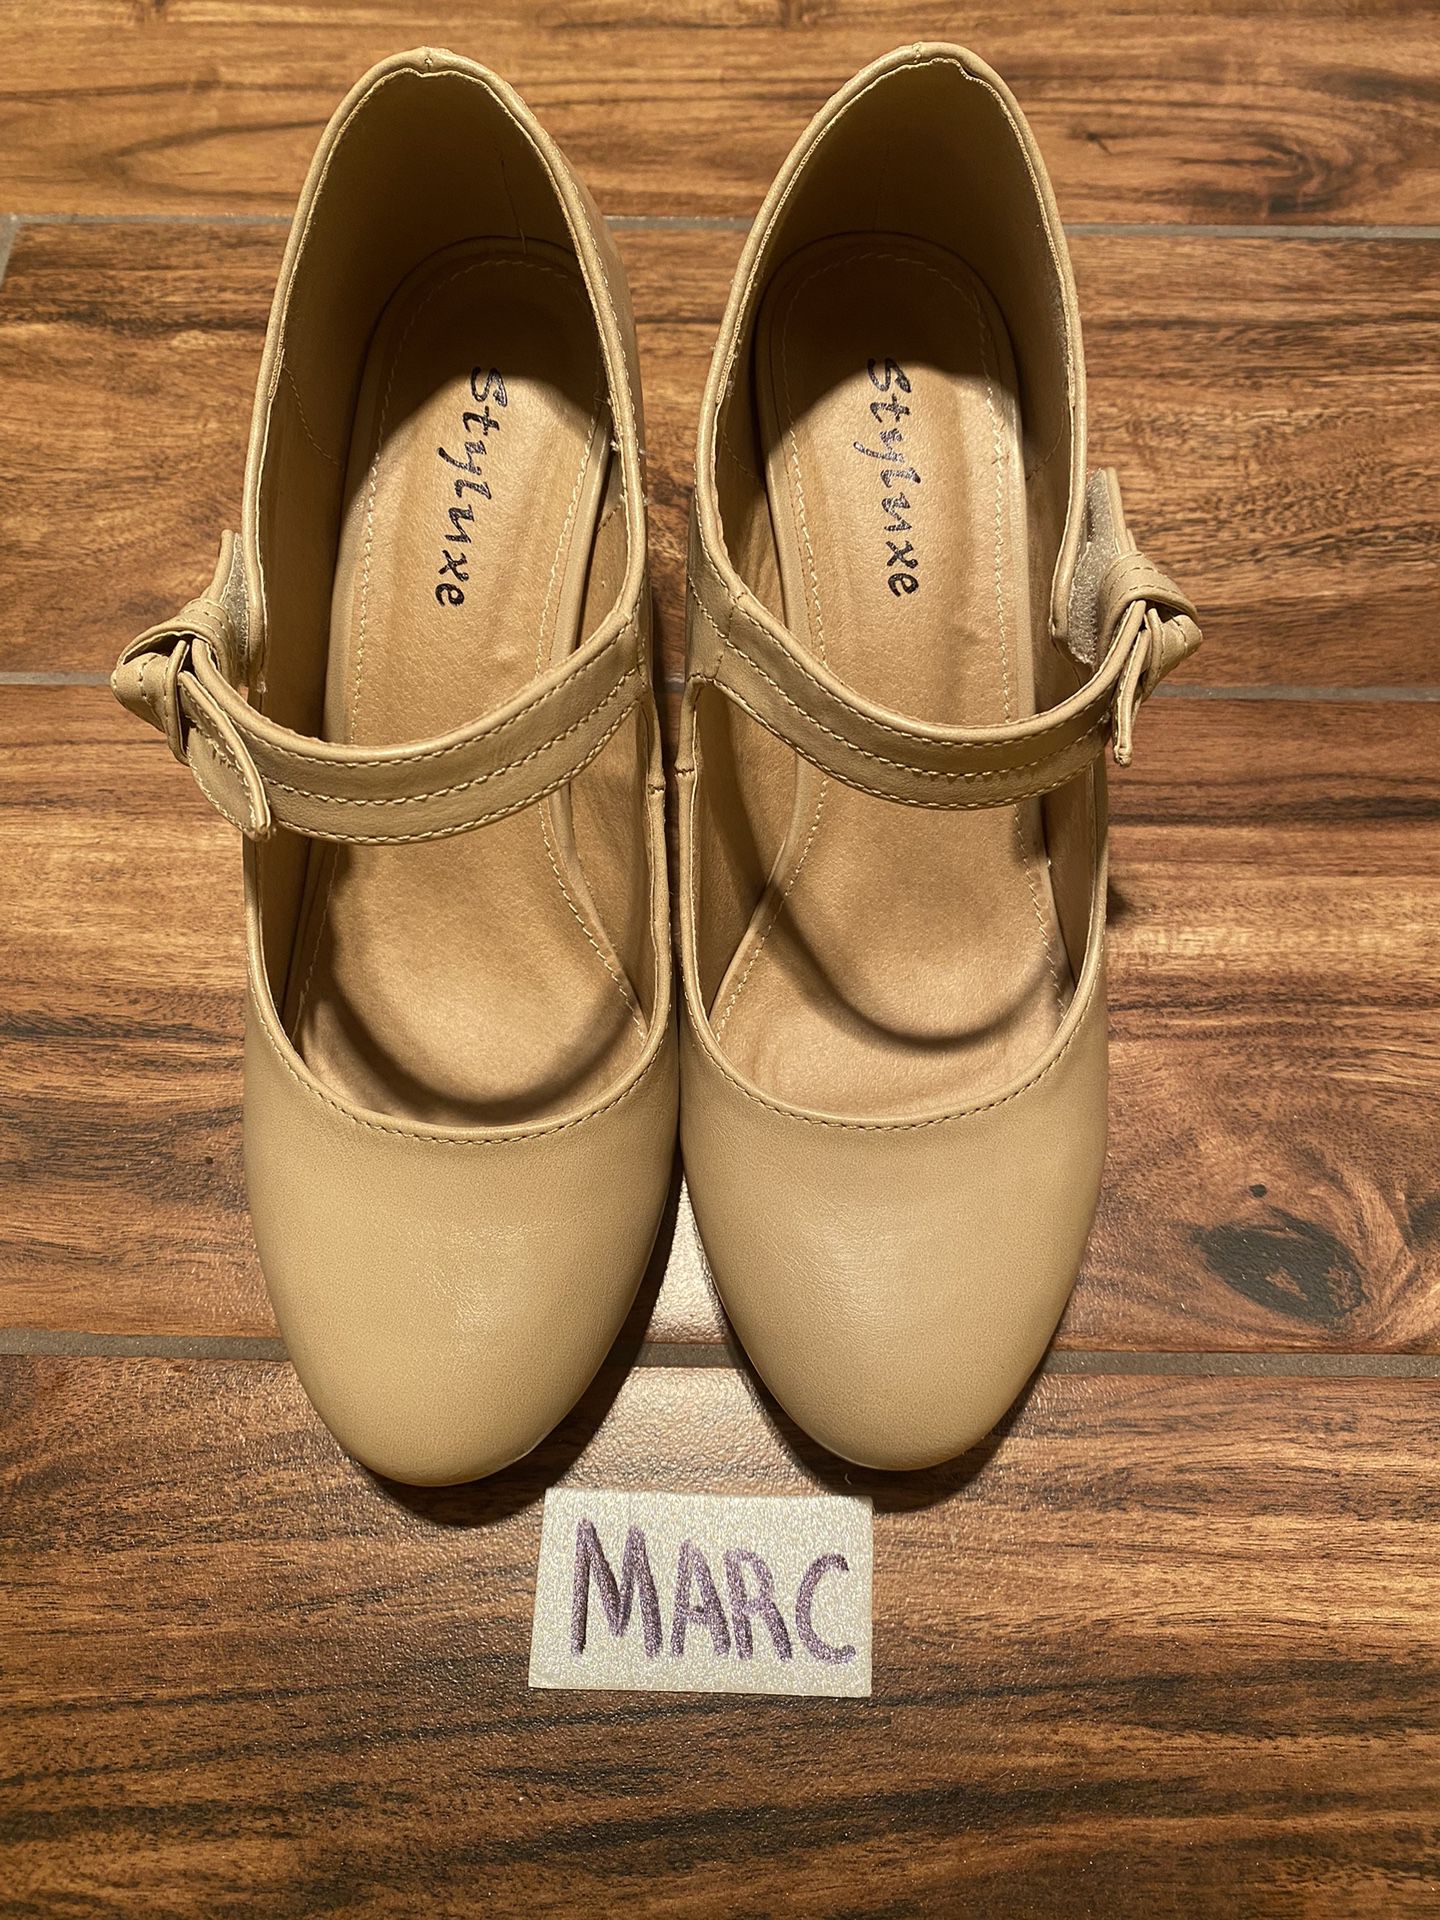 Tan Heels With Velcro Strap 